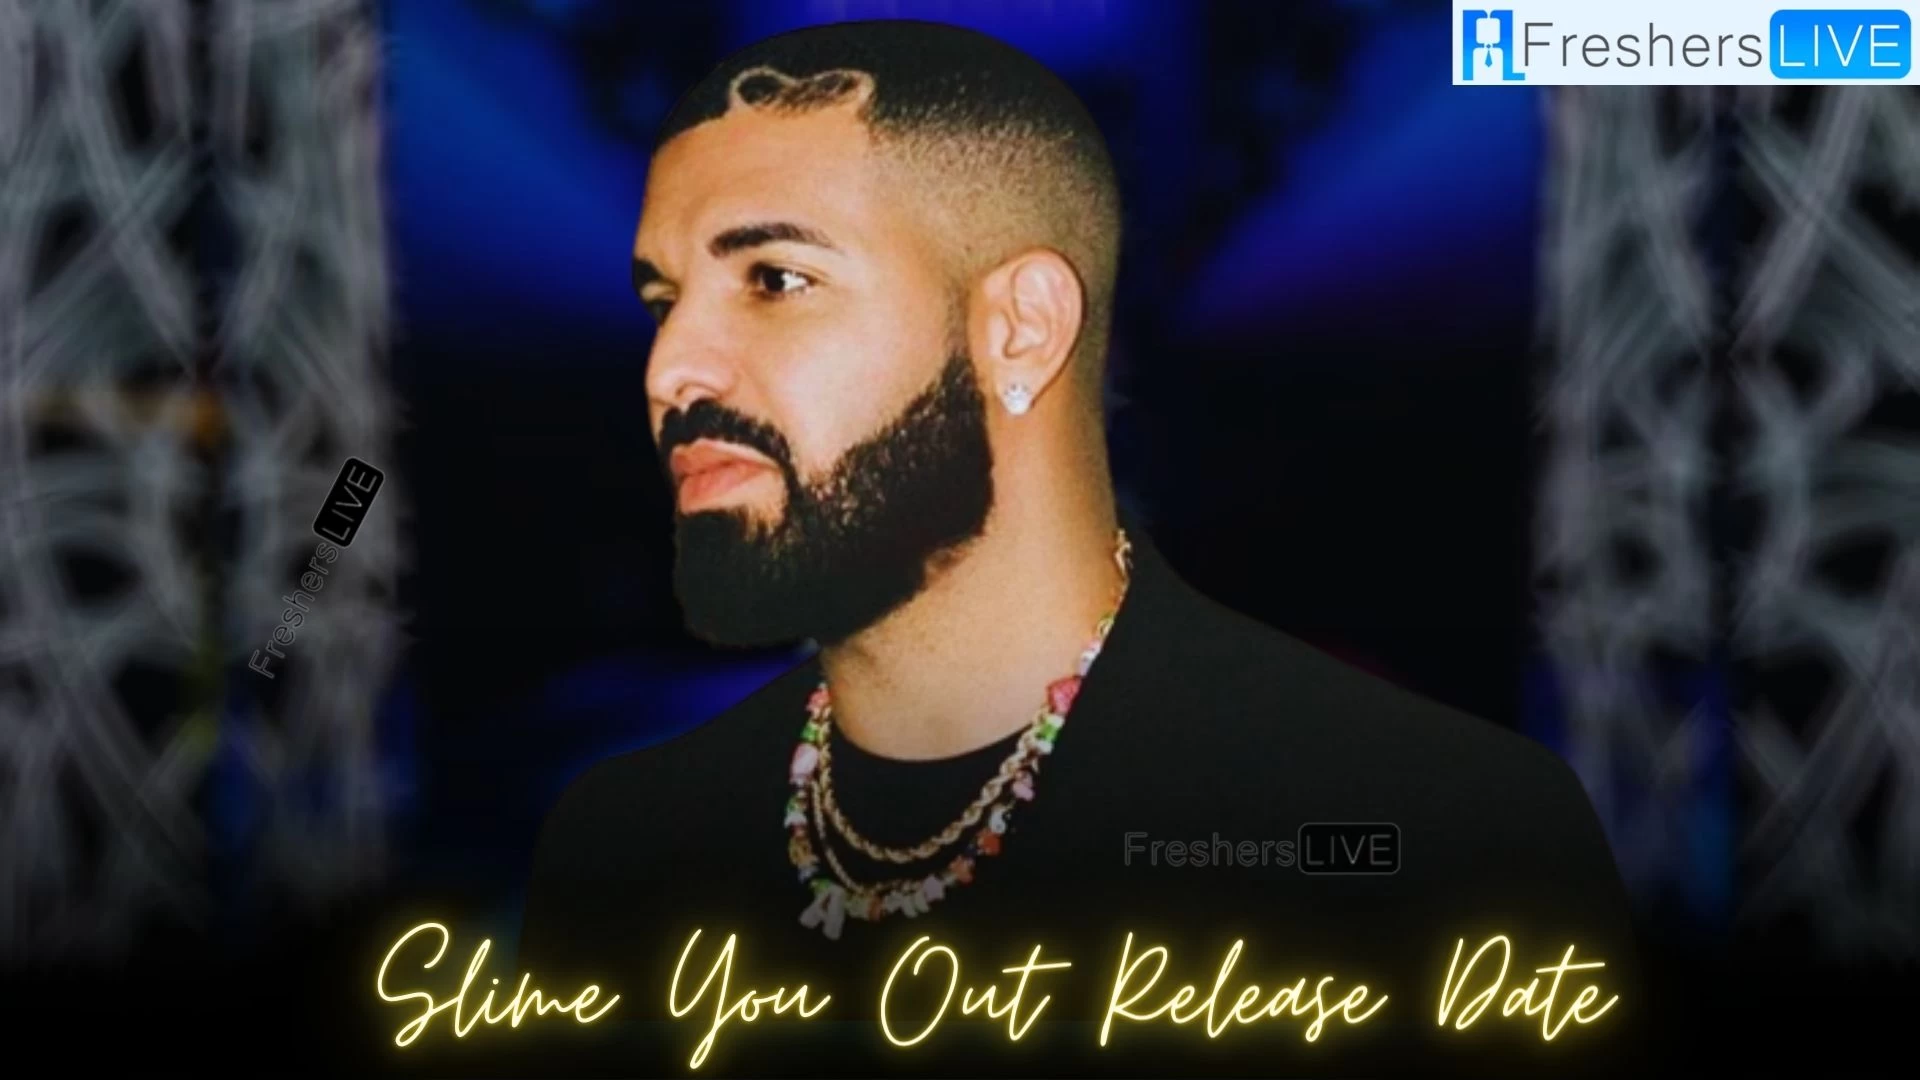 Slime You Out Release Date, When did Drake Release “Slime You Out”?